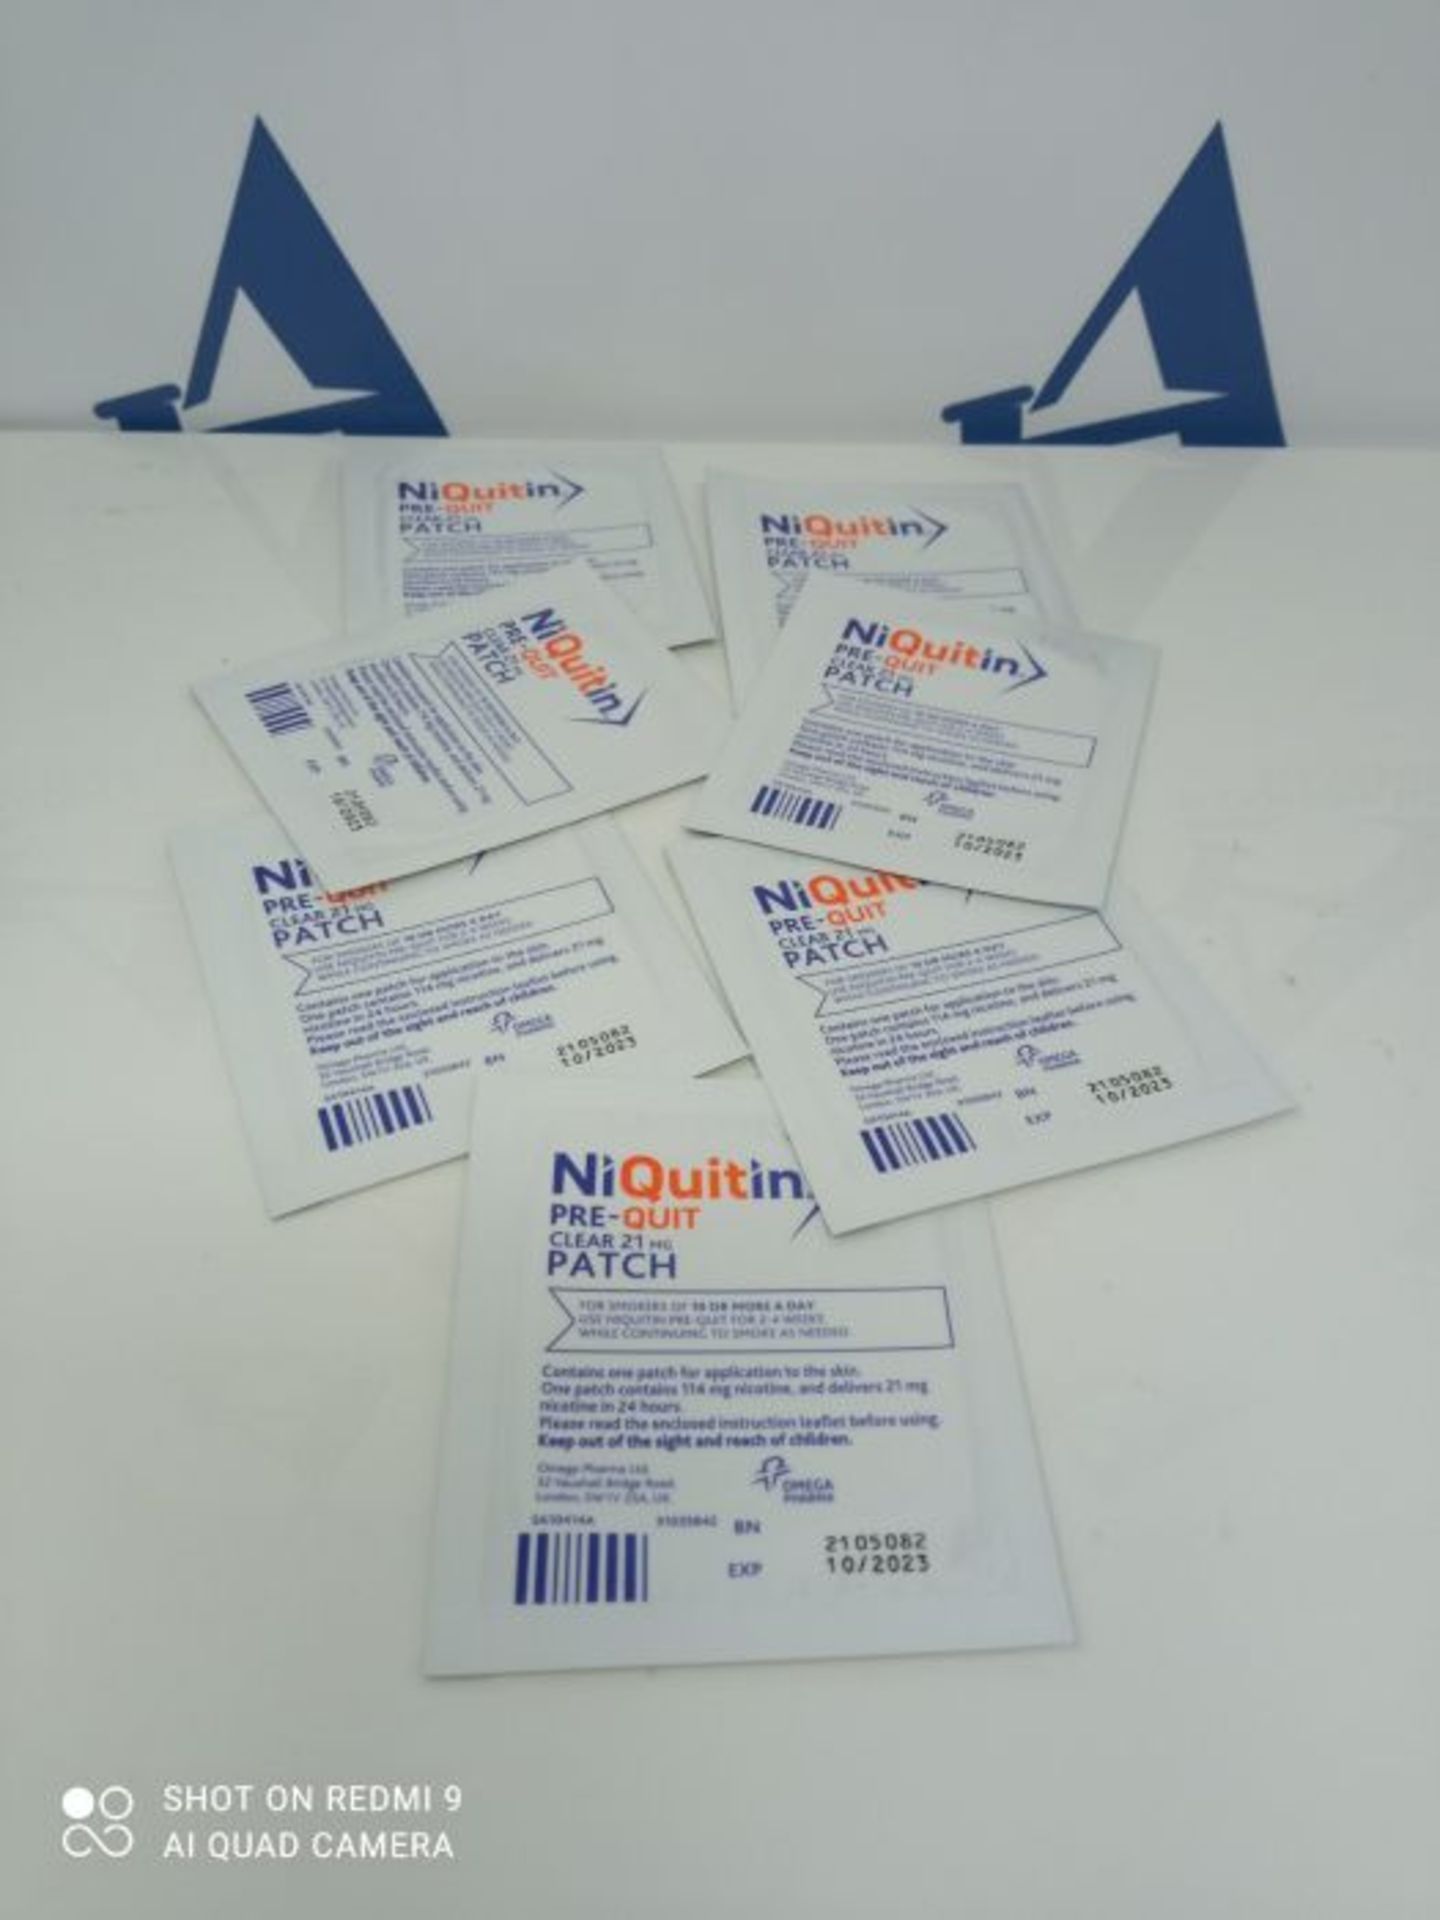 NiQuitin Clear Pre-Quit Patch - 21mg, 7 Nicotine Patches - Stop Smoking Aid - Image 3 of 3